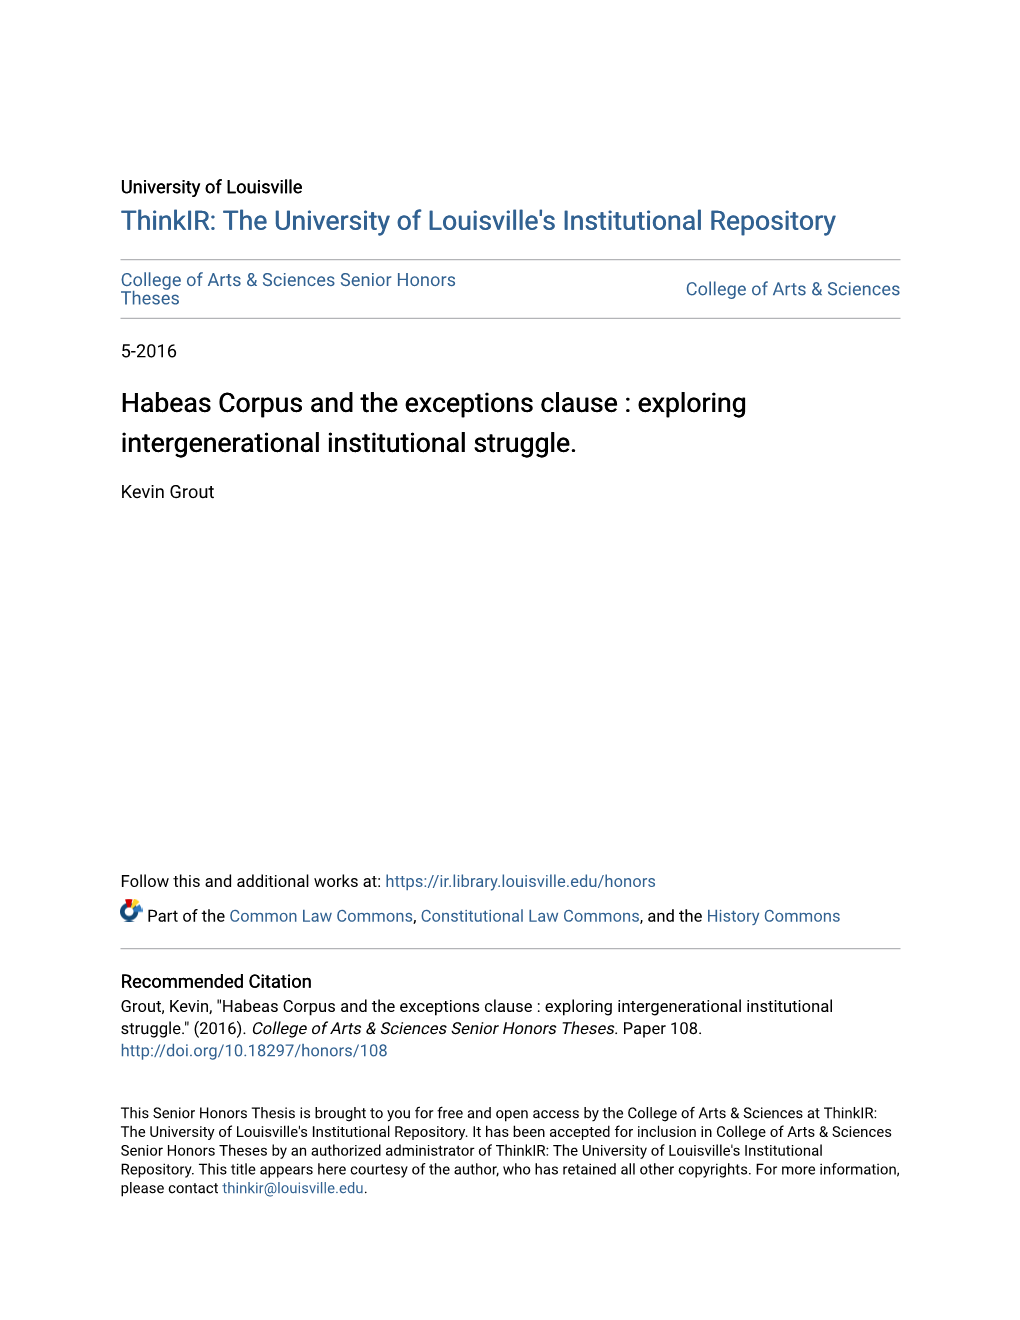 Habeas Corpus and the Exceptions Clause : Exploring Intergenerational Institutional Struggle